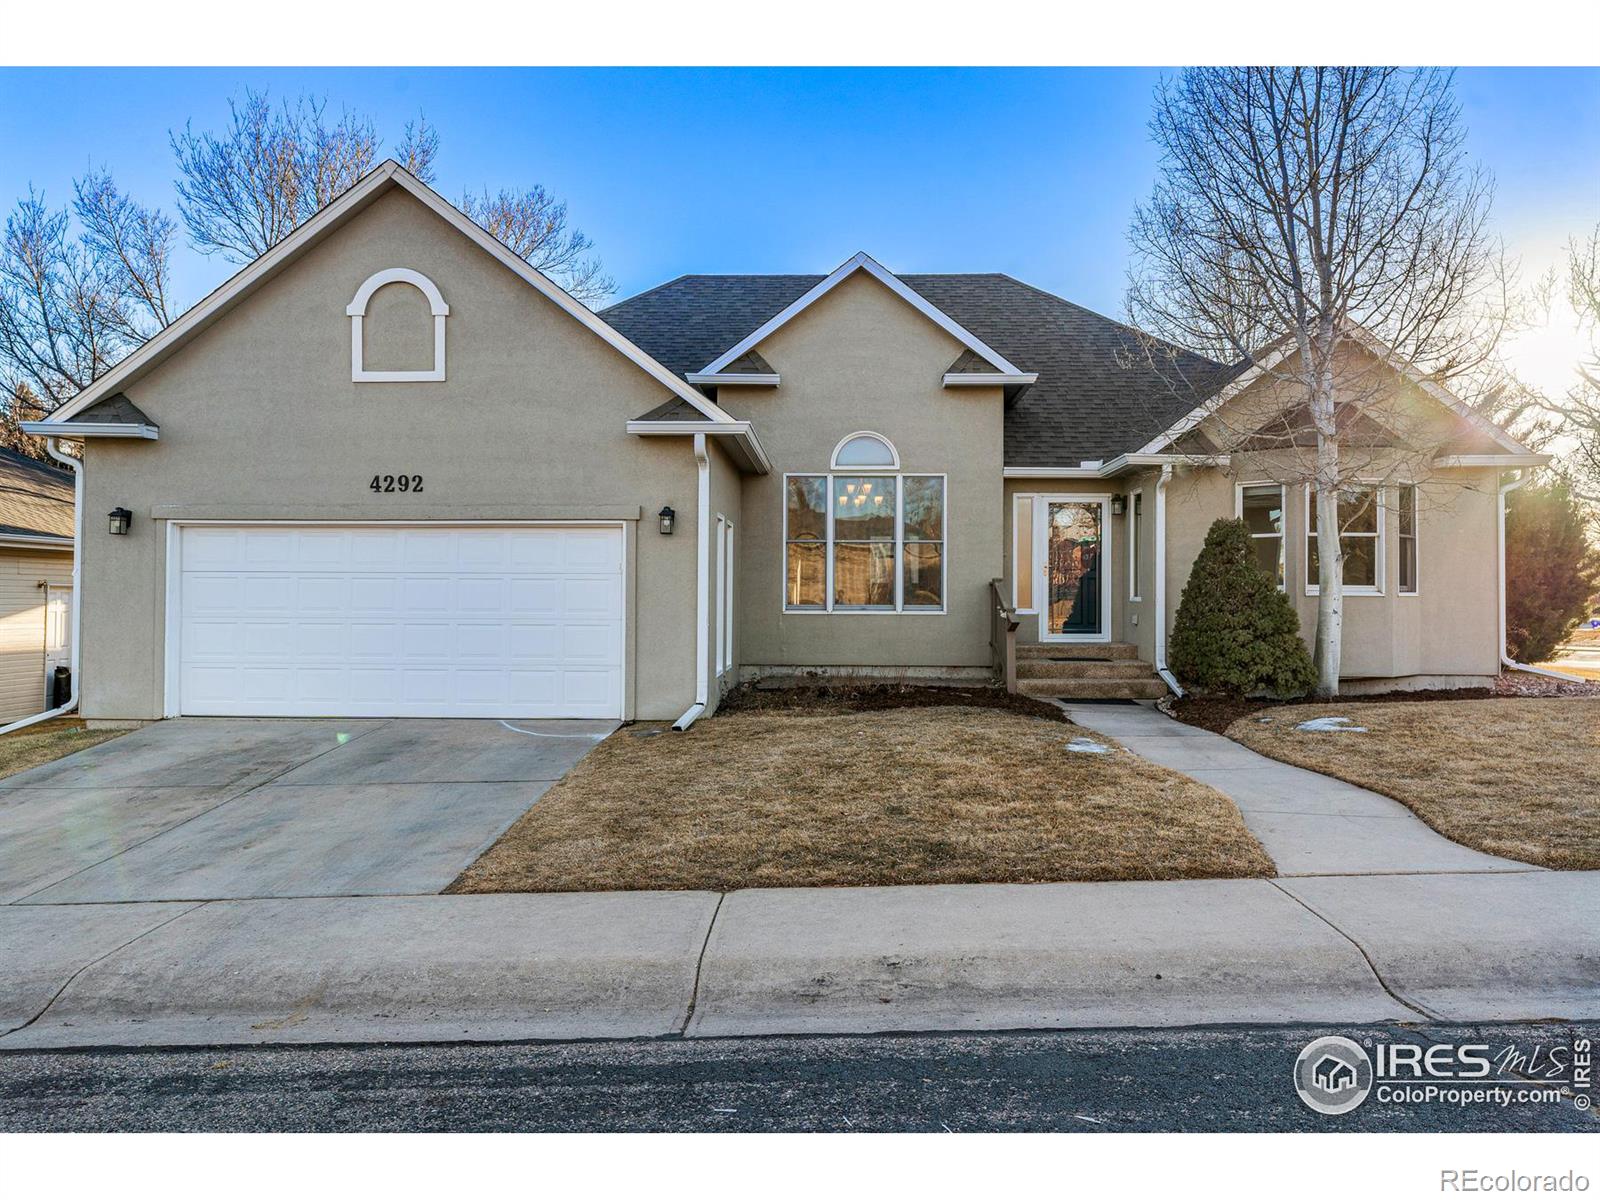 4292 W 14th St Dr, greeley MLS: 4567891002867 Beds: 4 Baths: 3 Price: $475,000